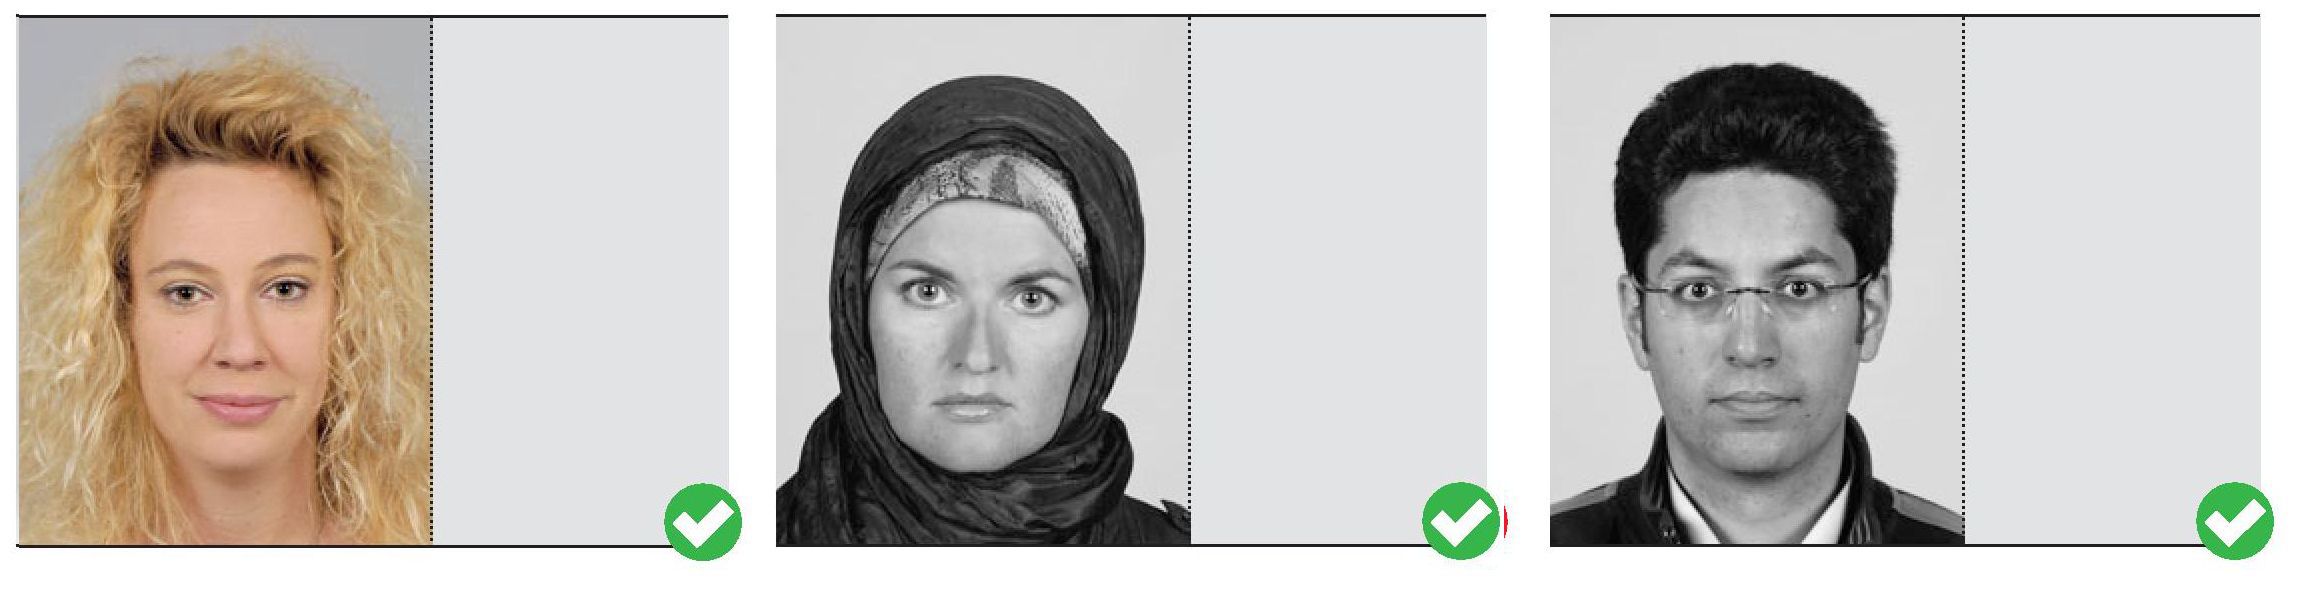 Some examples of perfect visa photo